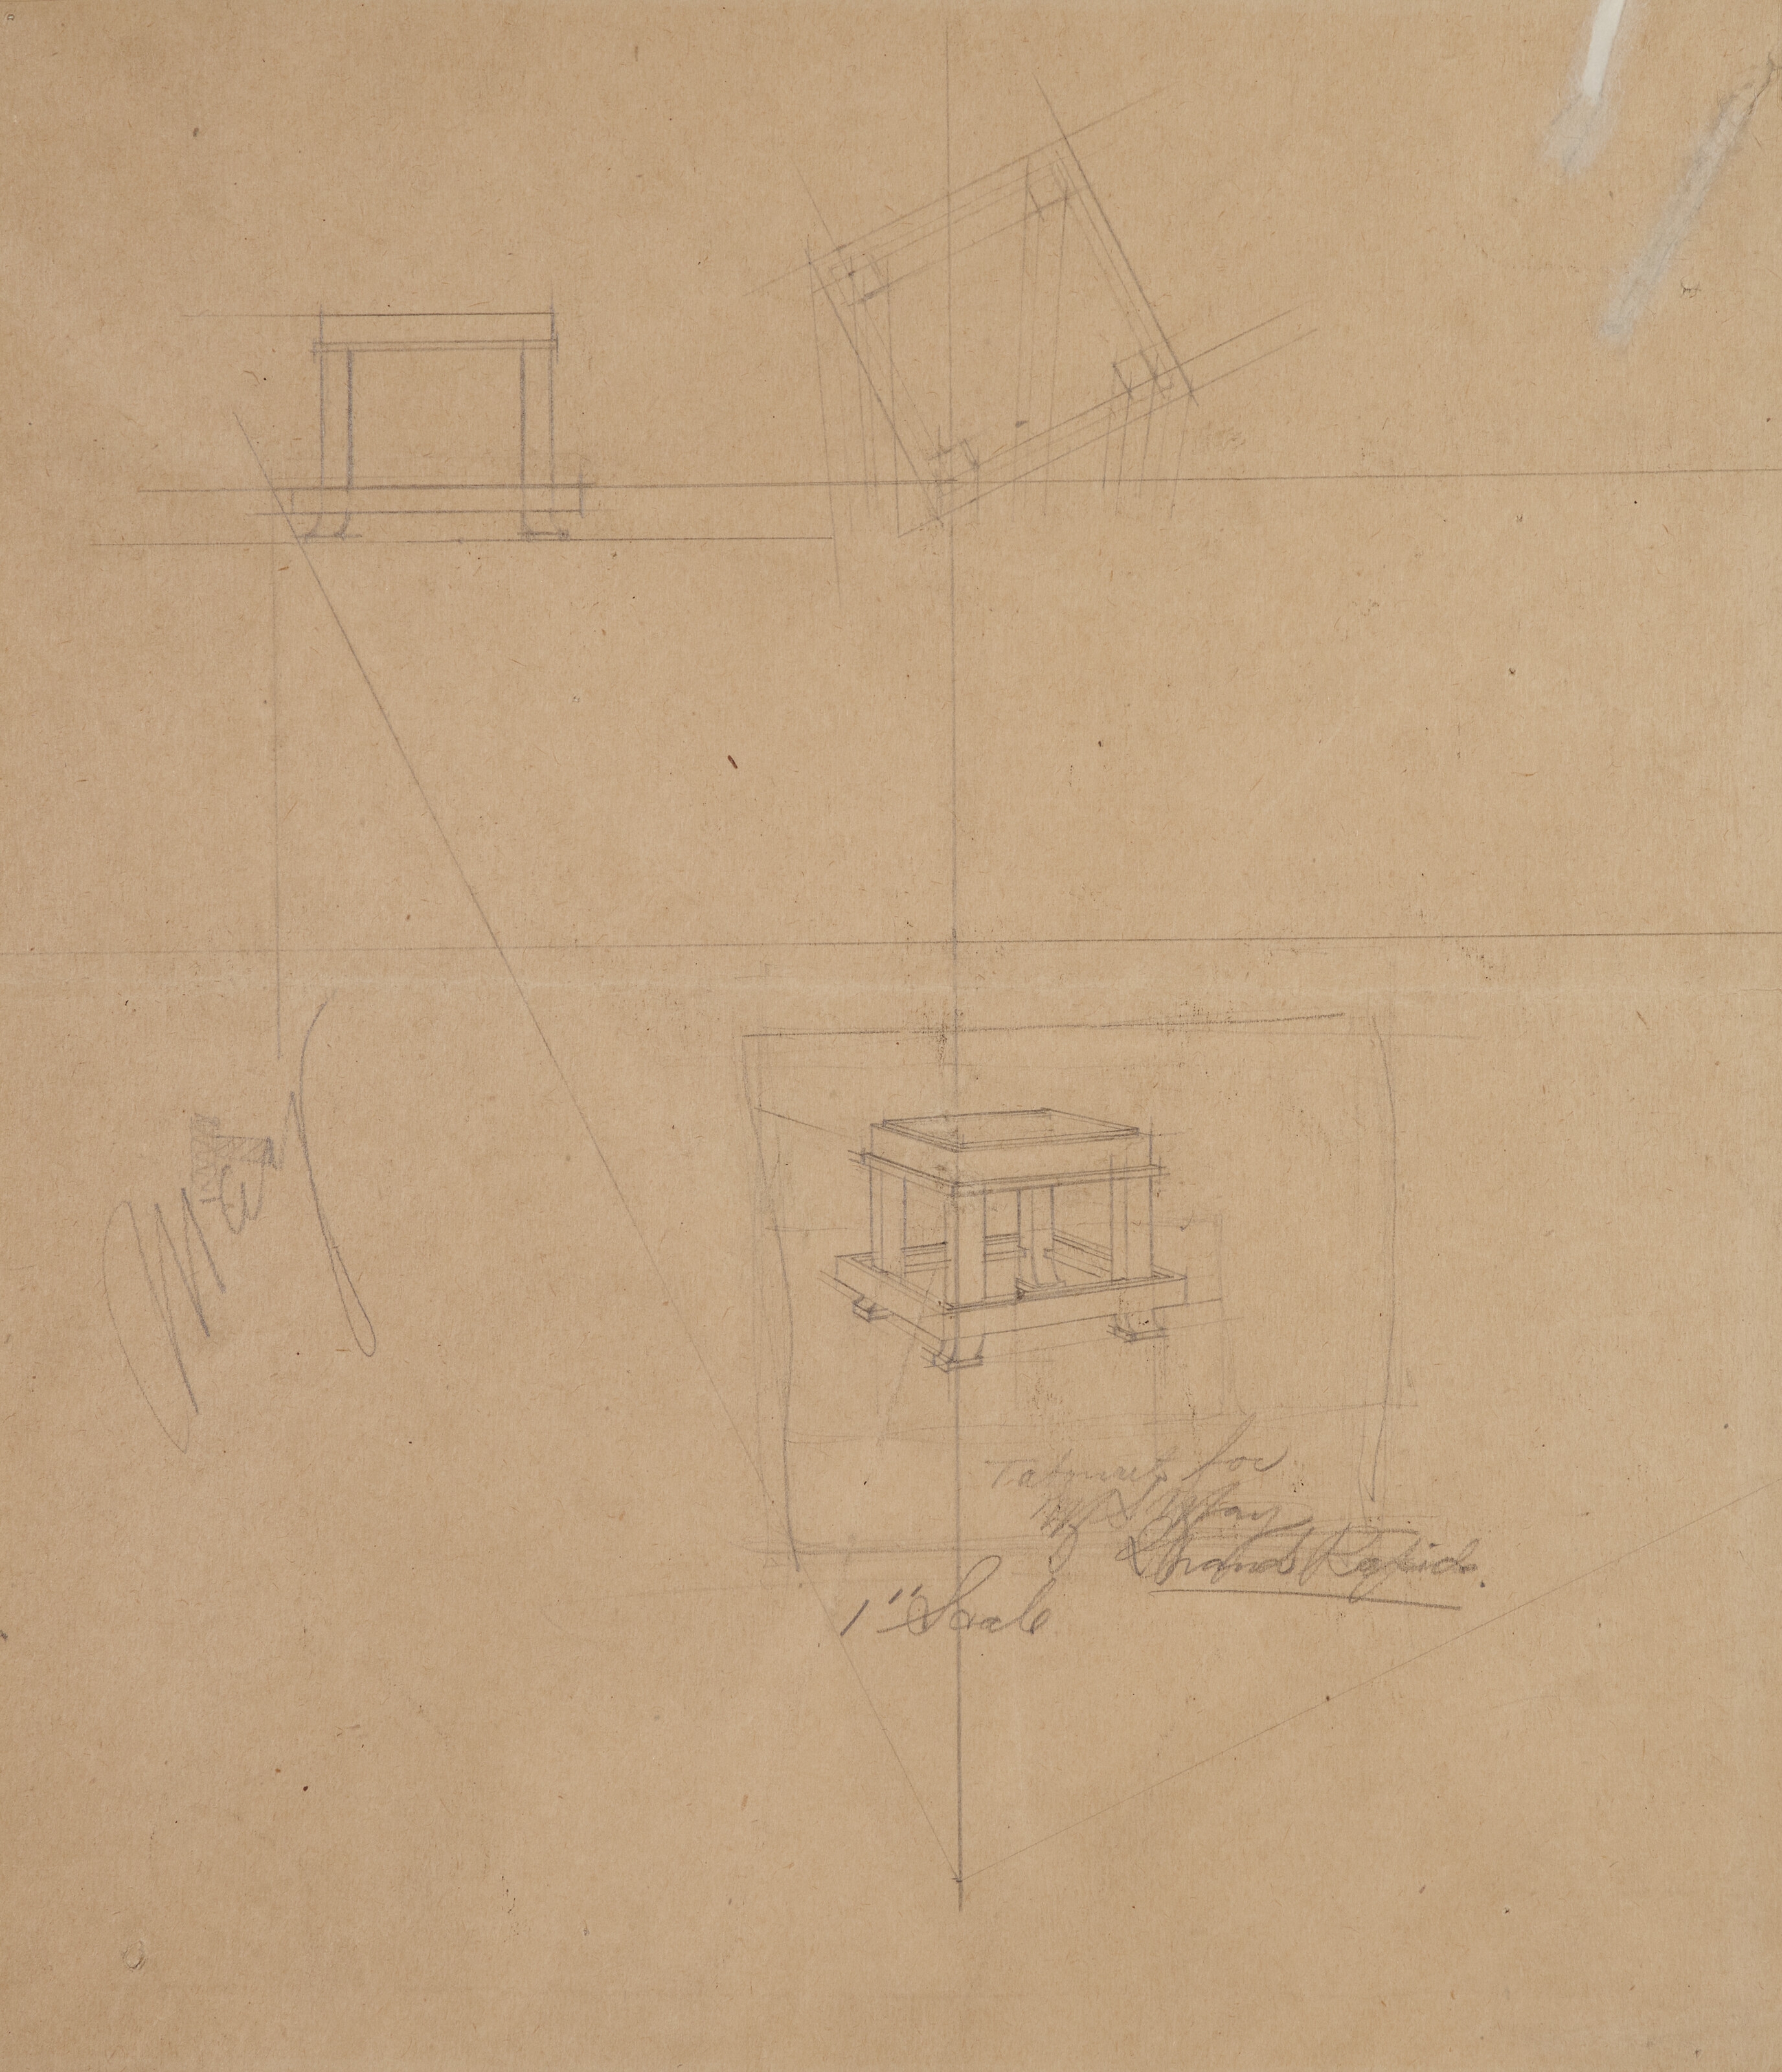 DRAWING OF A TABOURET FOR THE MEYER MAY HOUSE, GRAND RAPIDS, MICHIGAN